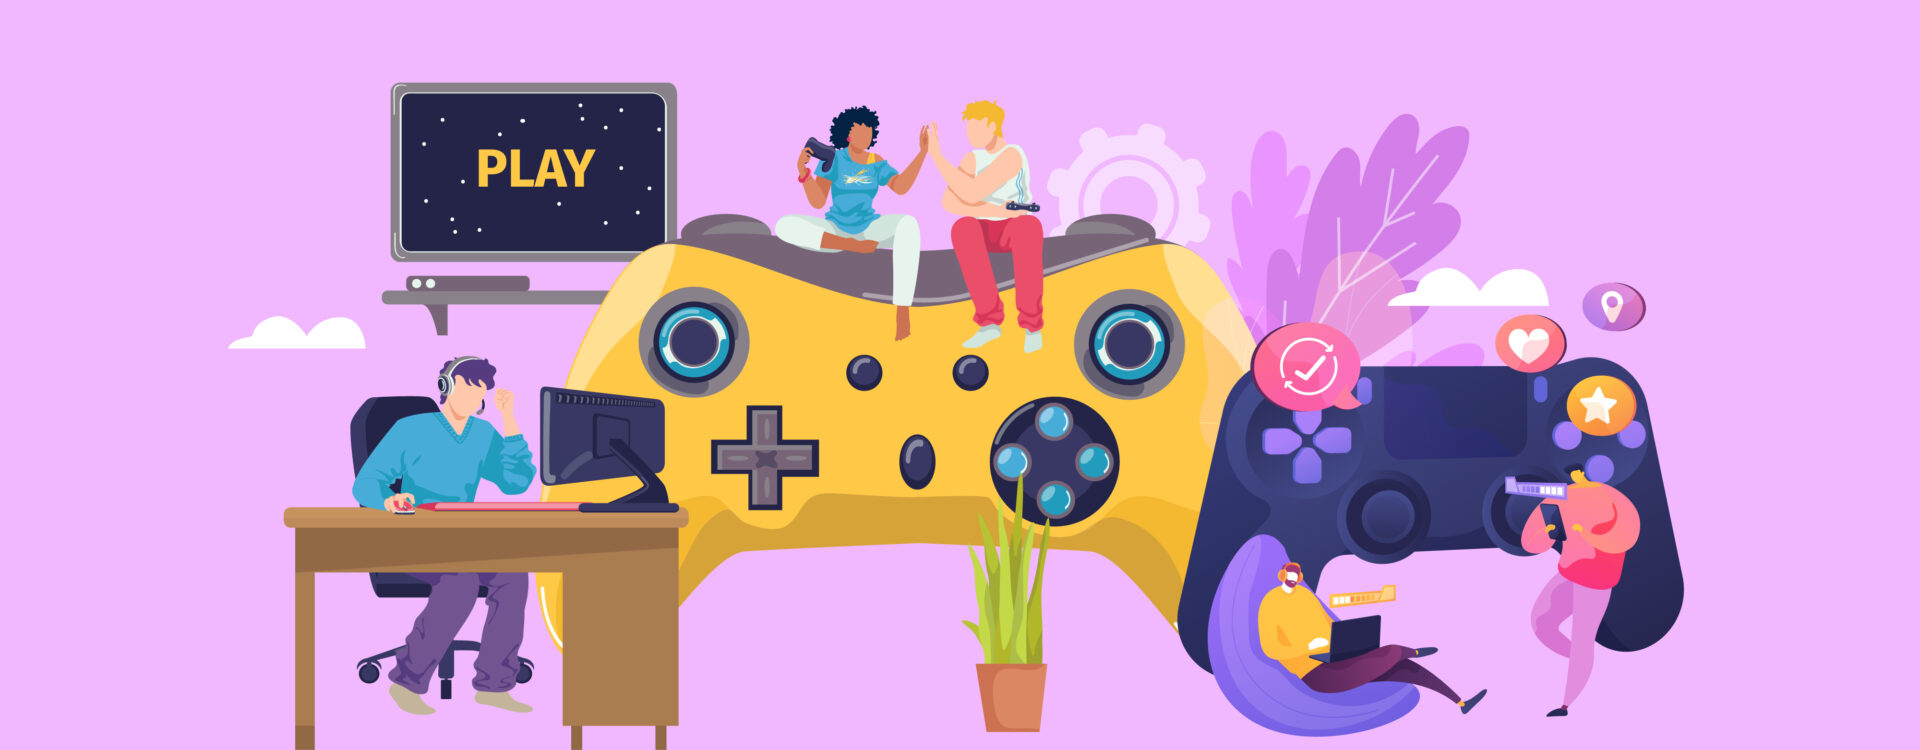 Online gaming startups soon gaining momentum will make it big in 2021